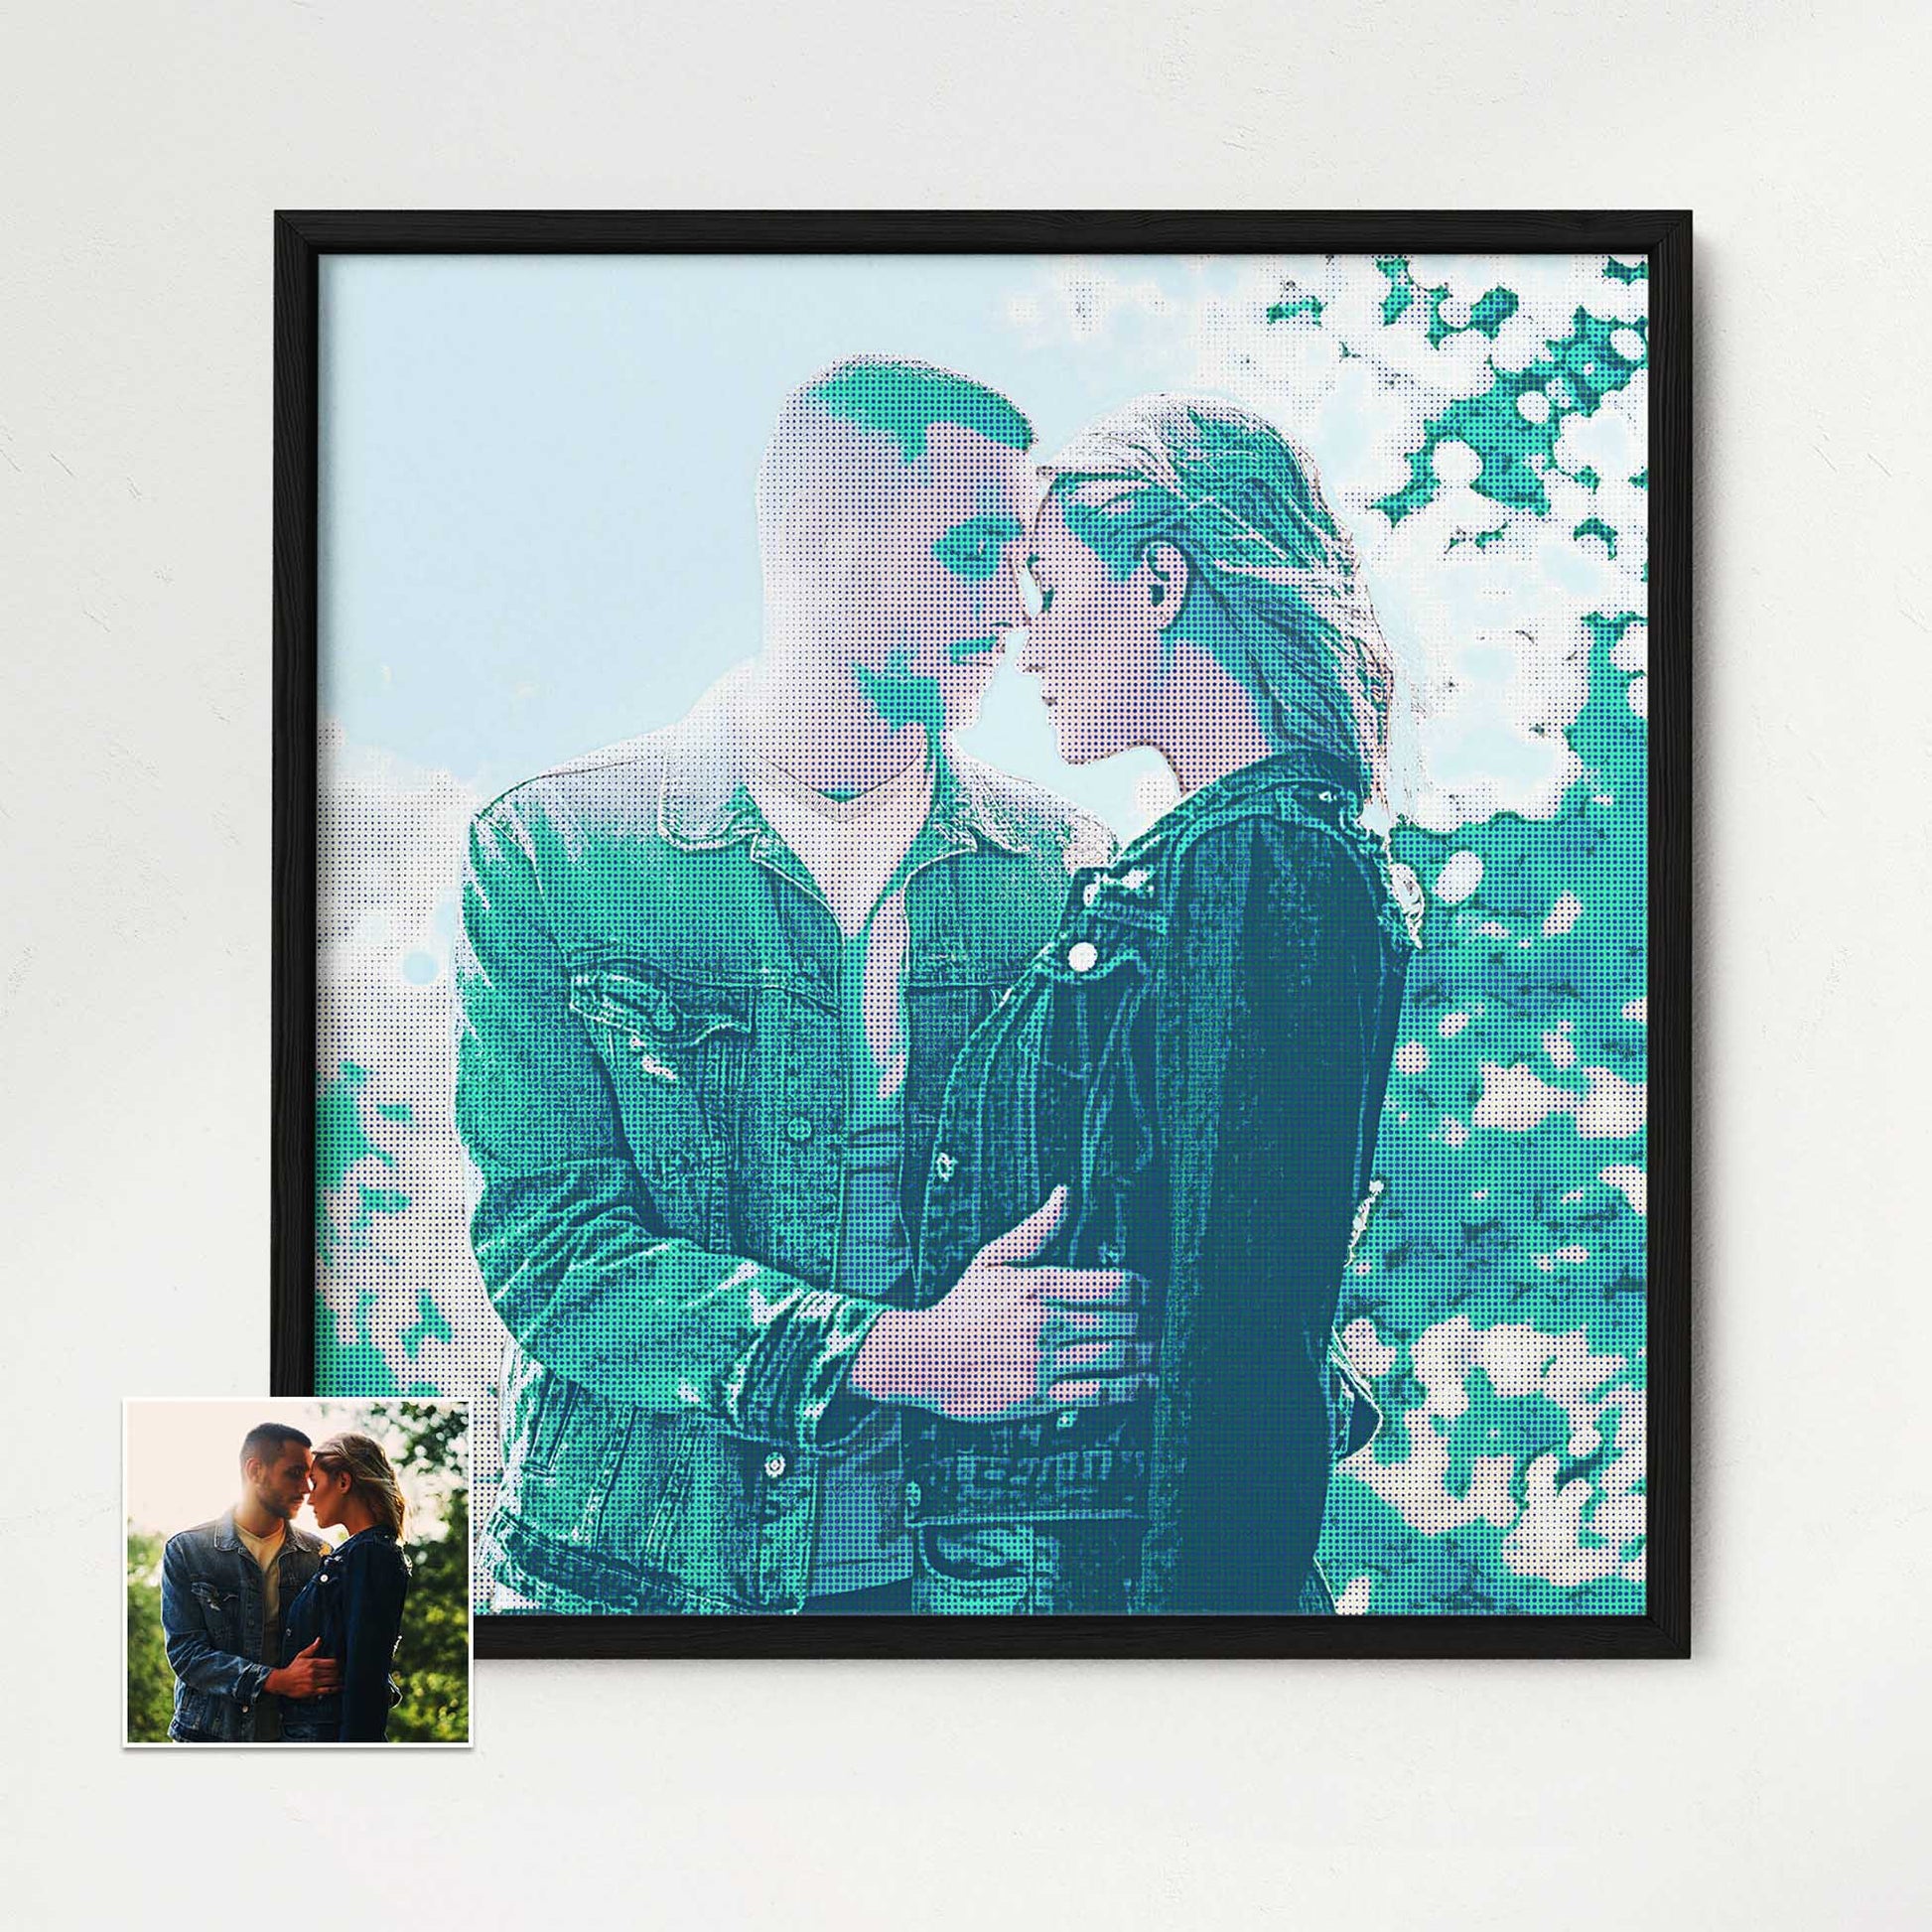 Experience the joy of the Personalised Teal Grunge Framed Print, an exciting addition to your home decor. With its halftone effect and old-school retro vibe, this unique and original print from photo captures a fresh and cool essence